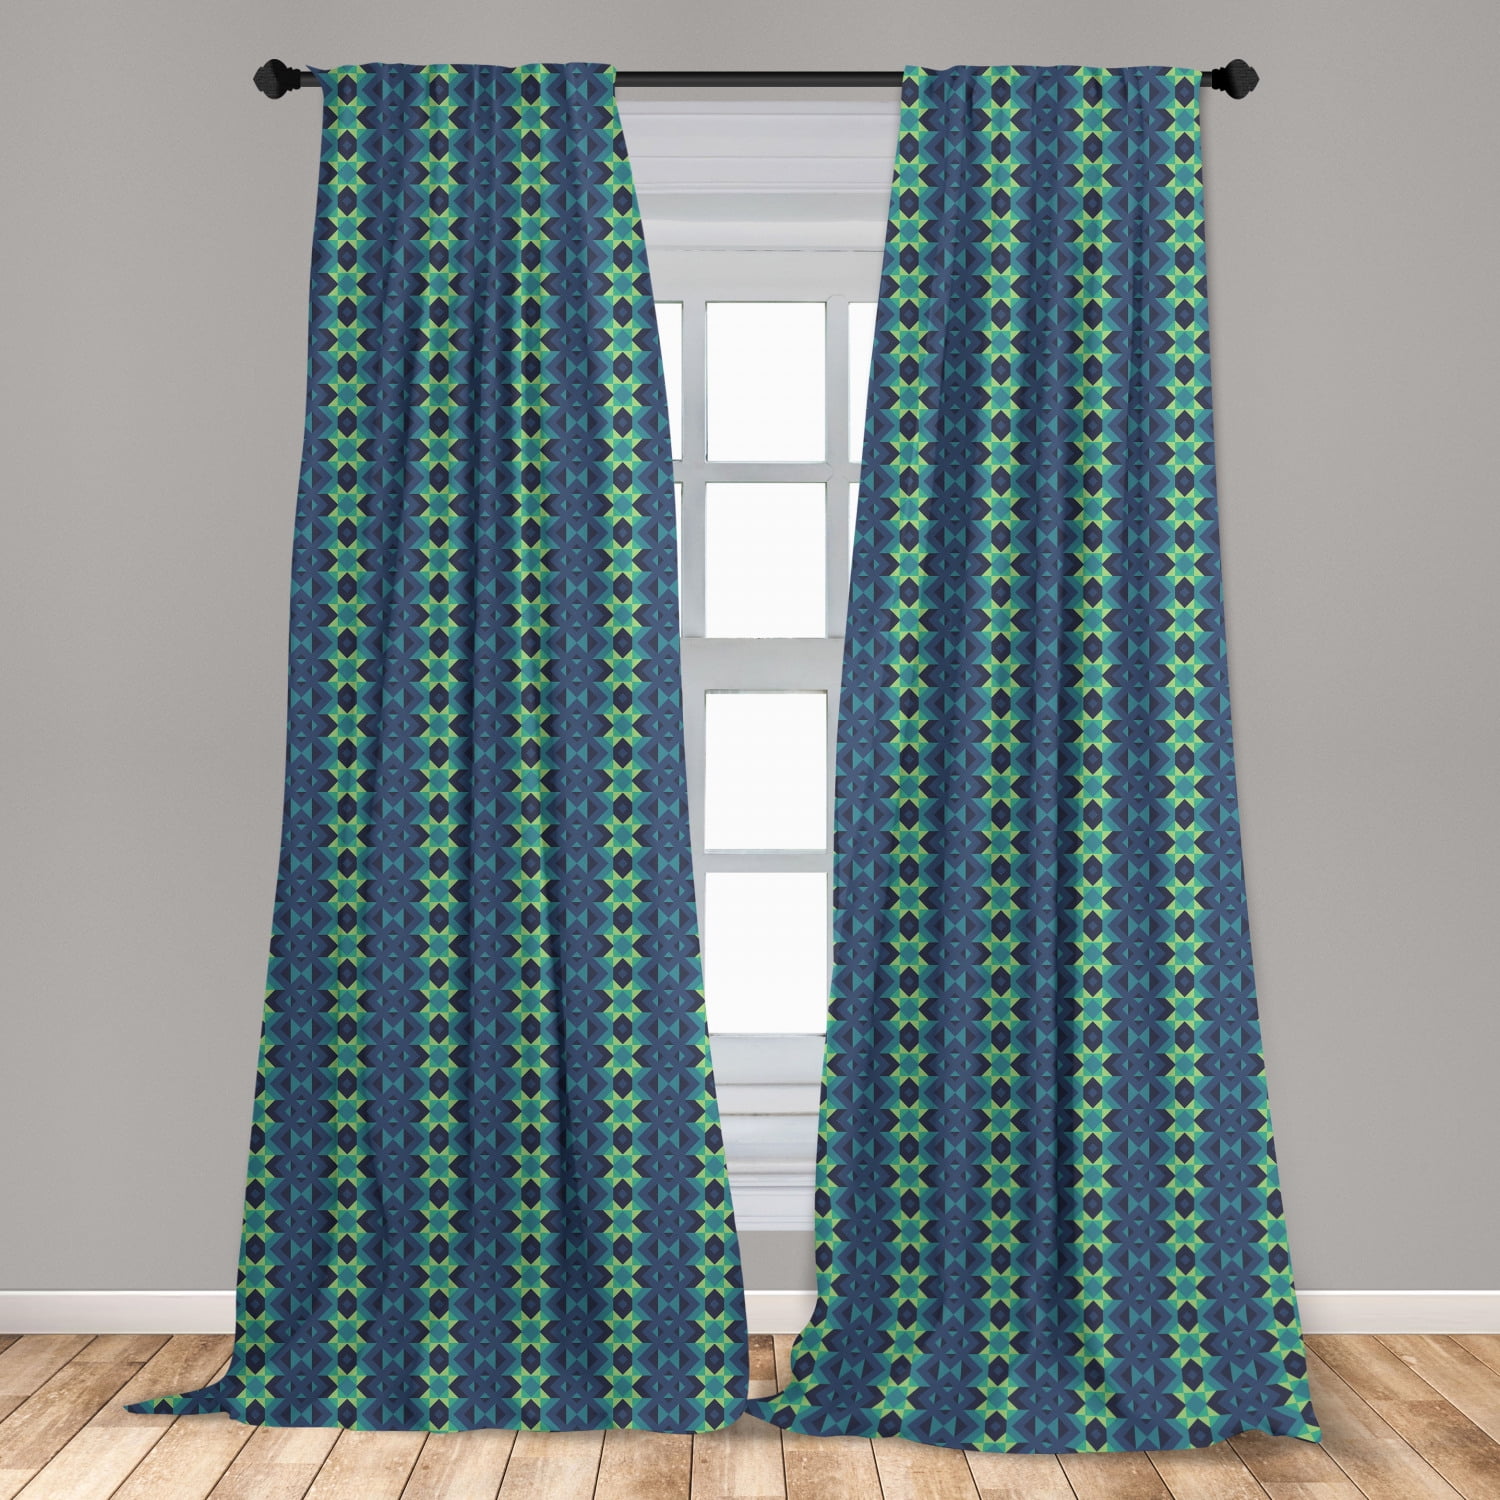 Valance Window Curtain NAVY WITH BRIGHT COLORED LIZARDS Boys Room Custom Made 